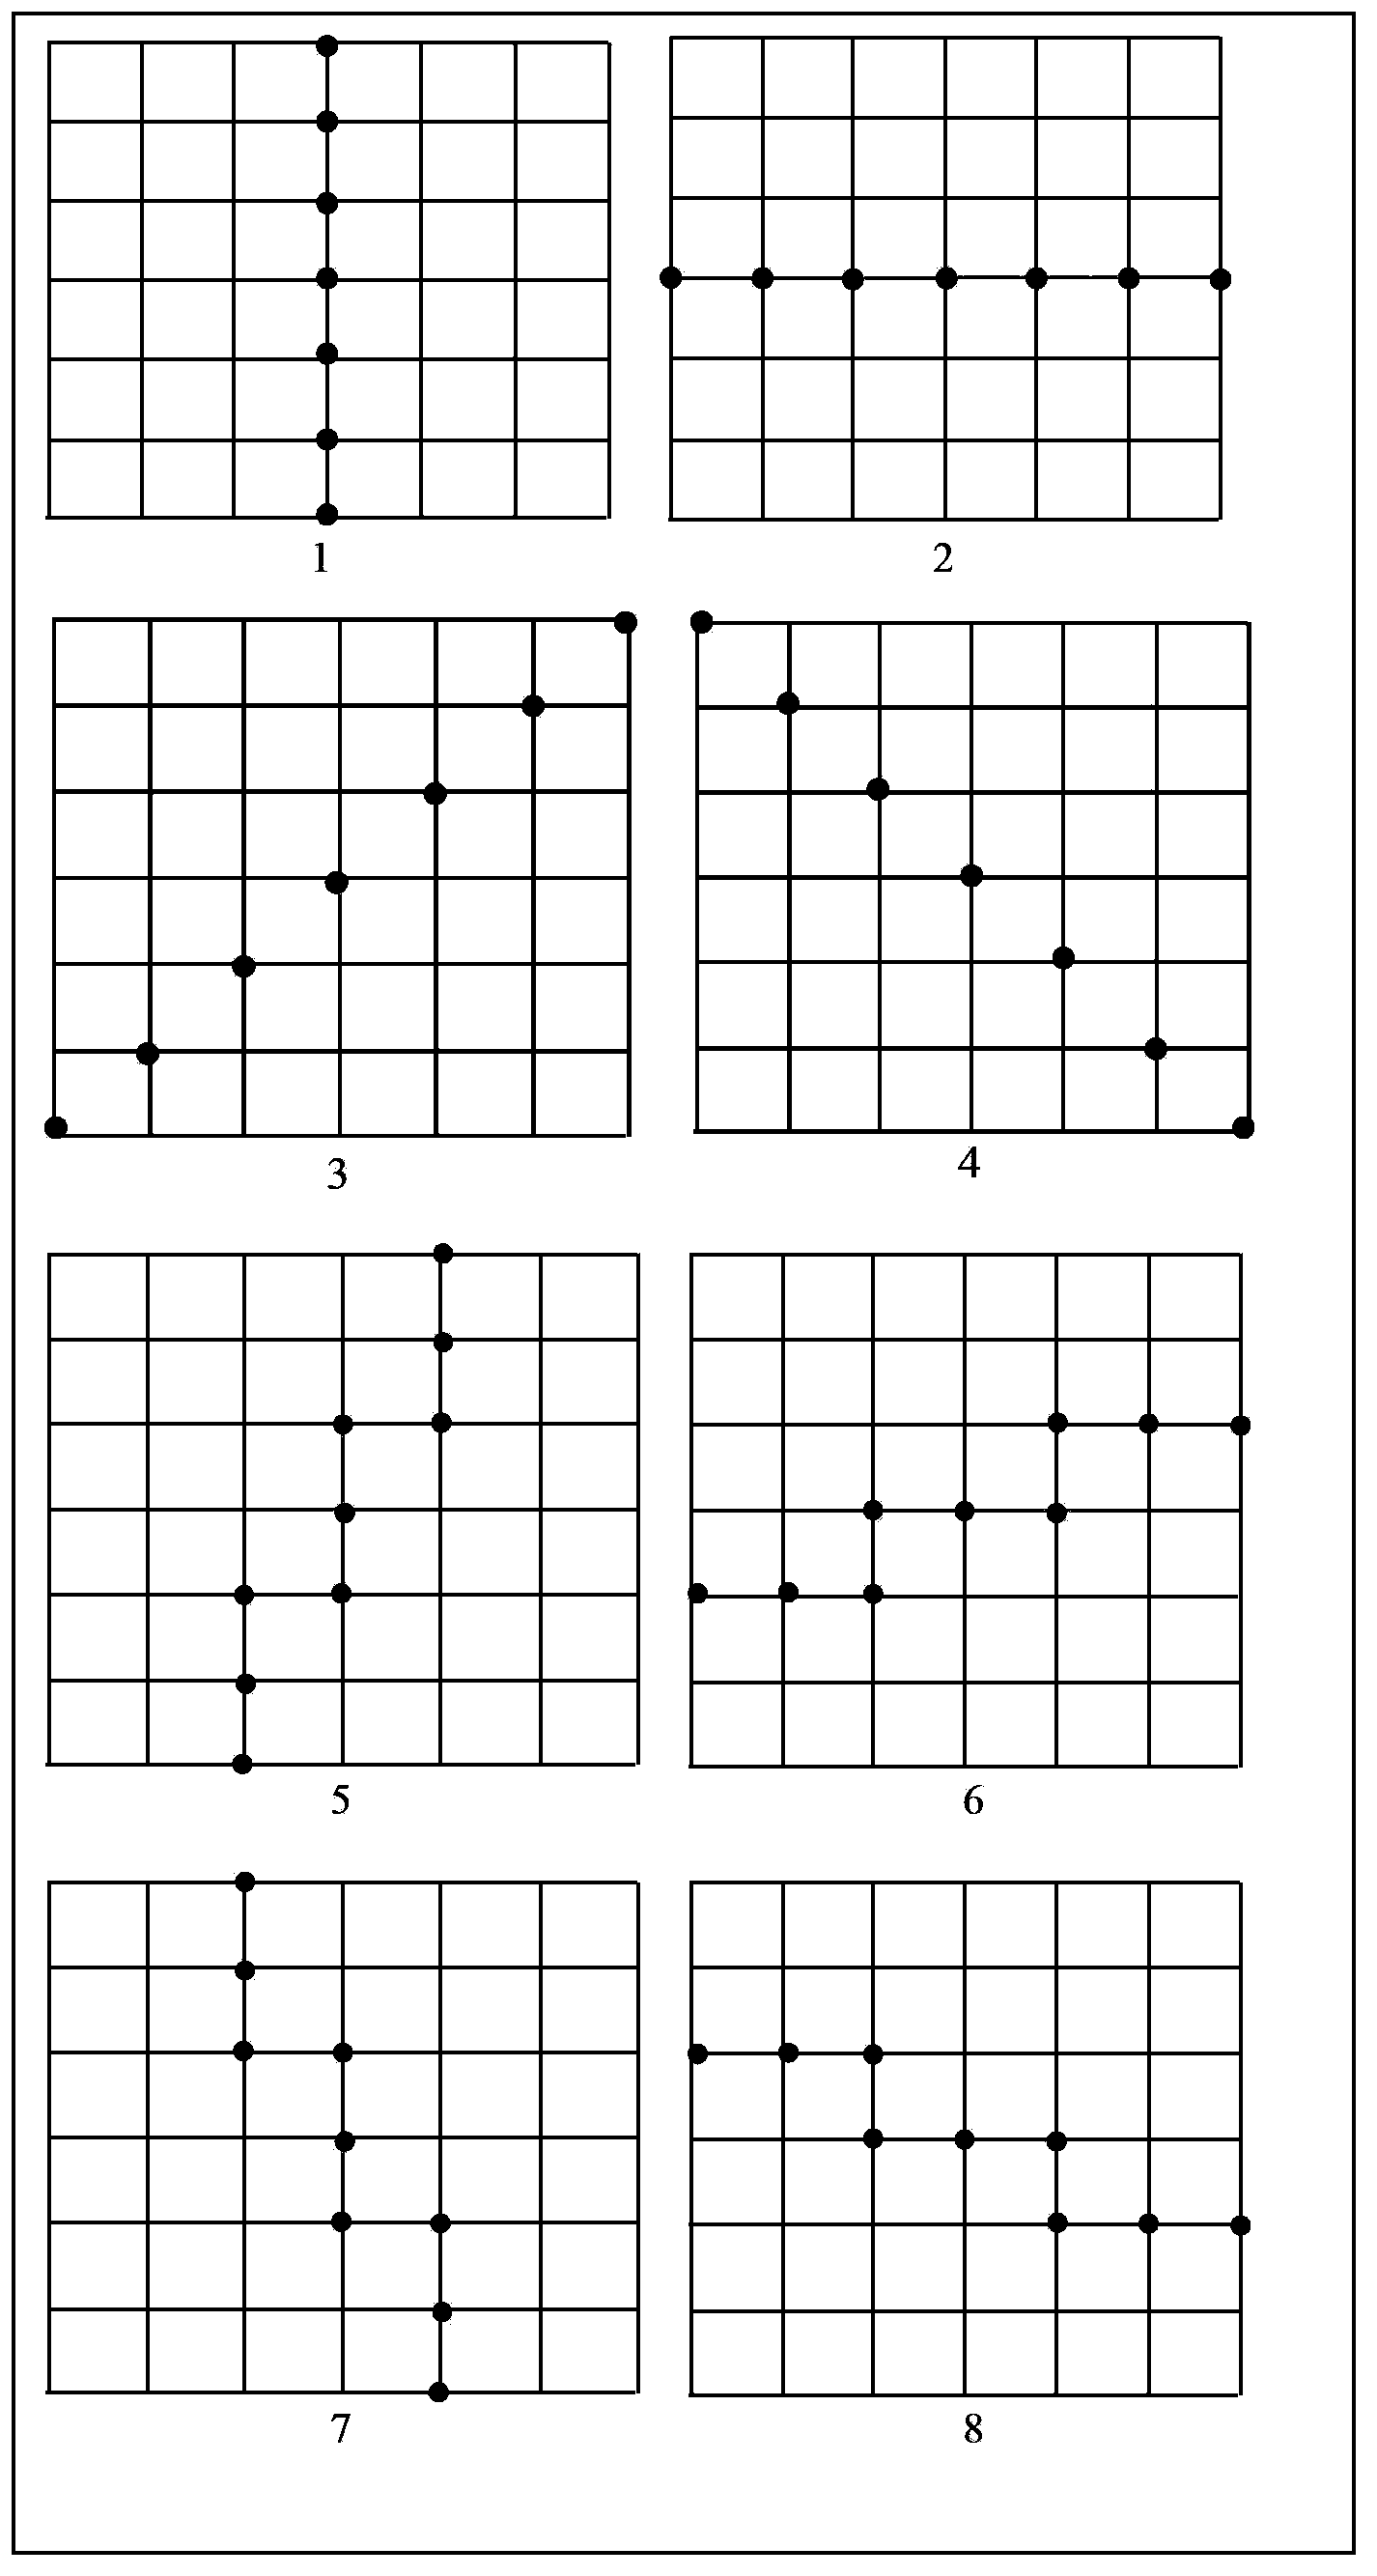 Compensation direction filtering method of two-dimensional grid data